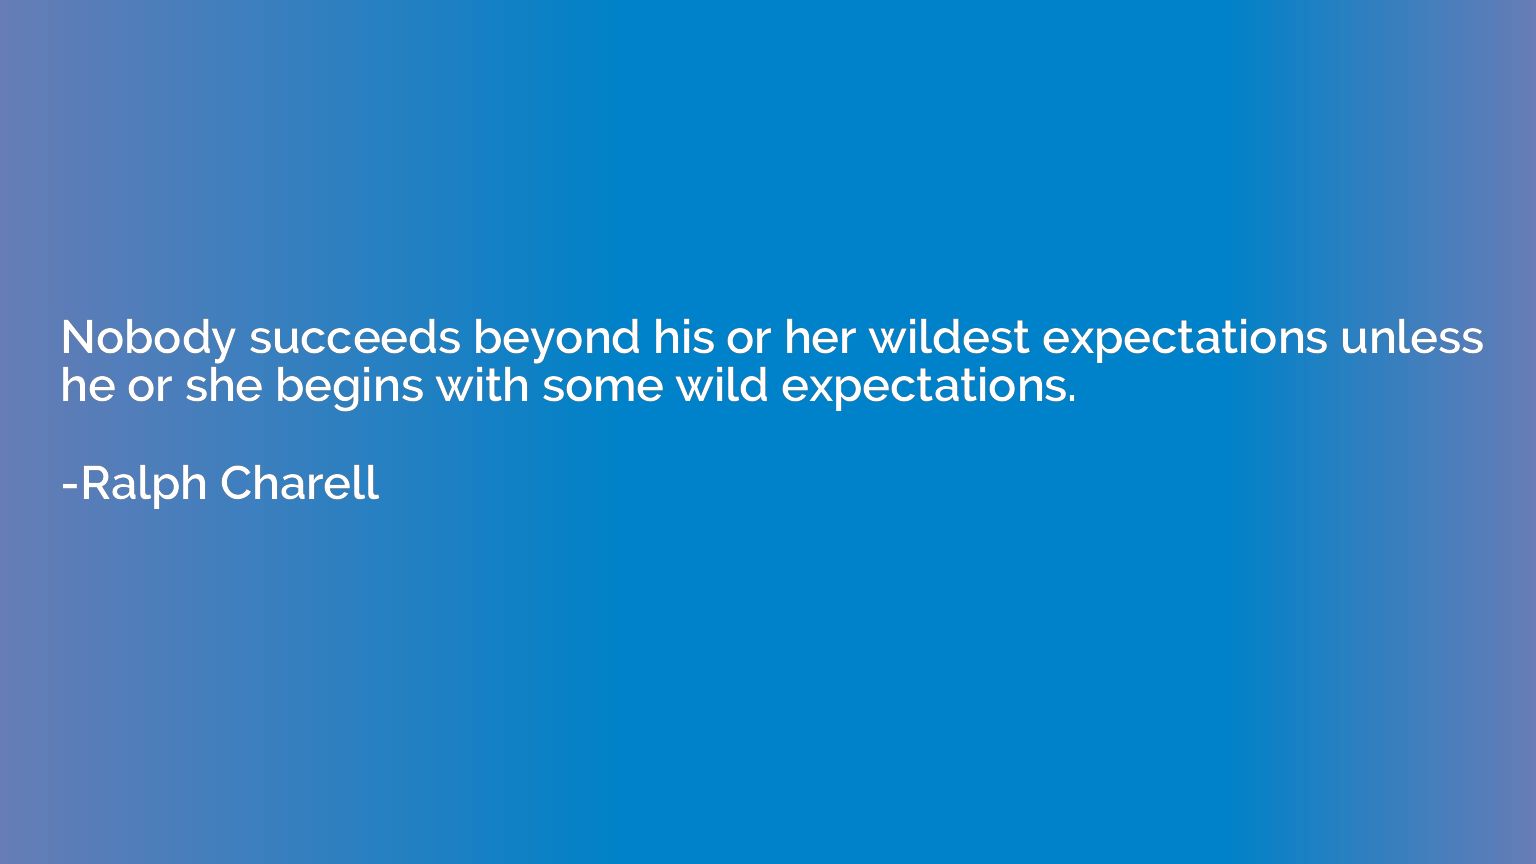 Nobody succeeds beyond his or her wildest expectations unles